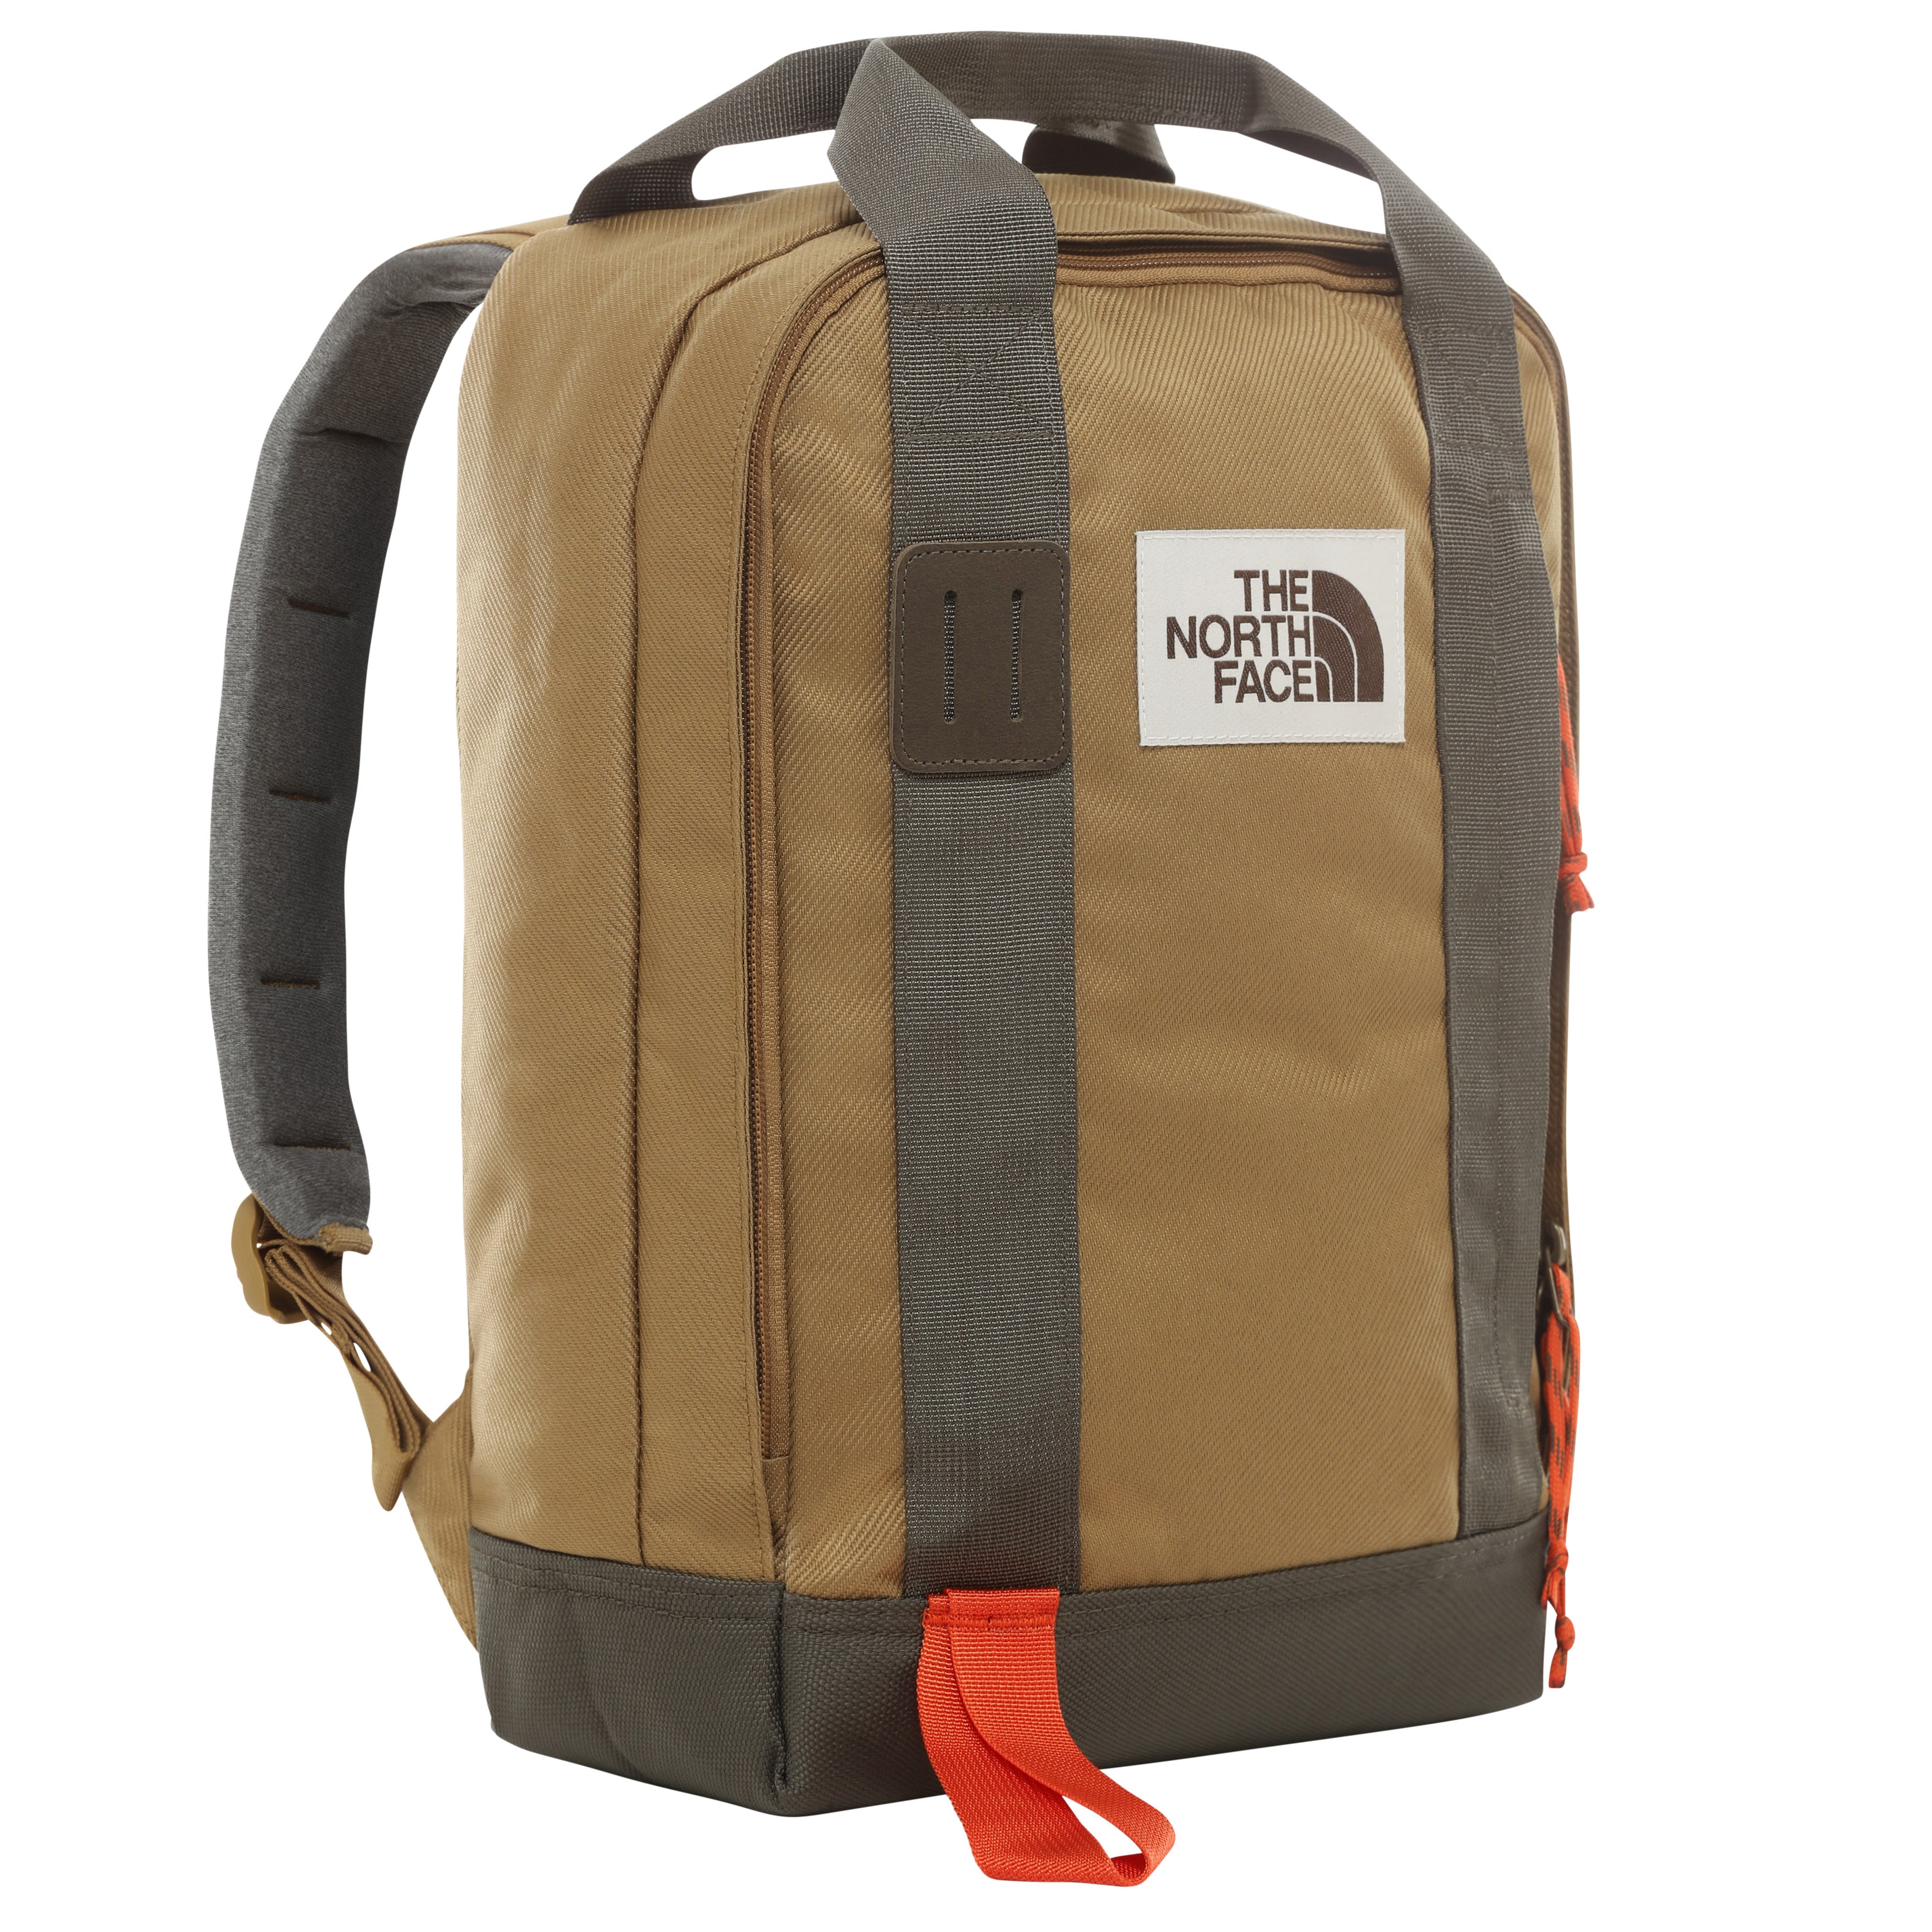 The North Face Backpacks Mens Best Sellers Borealis Black